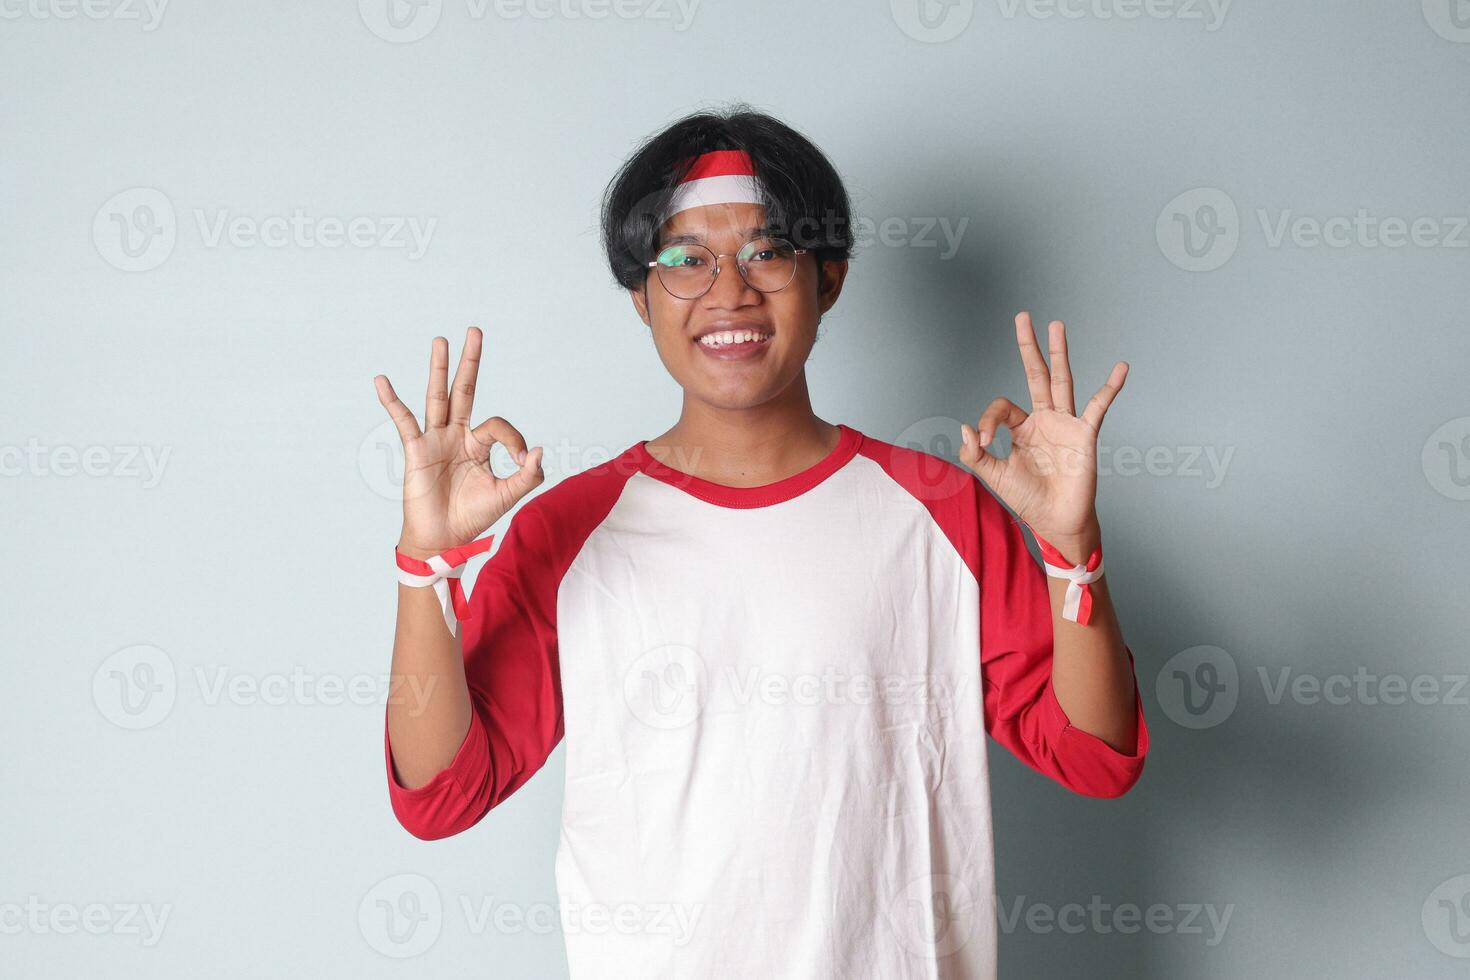 Portrait of attractive Asian man in t-shirt with red and white ribbon on head, showing ok hand gesture and smiling. Isolated image on gray background photo